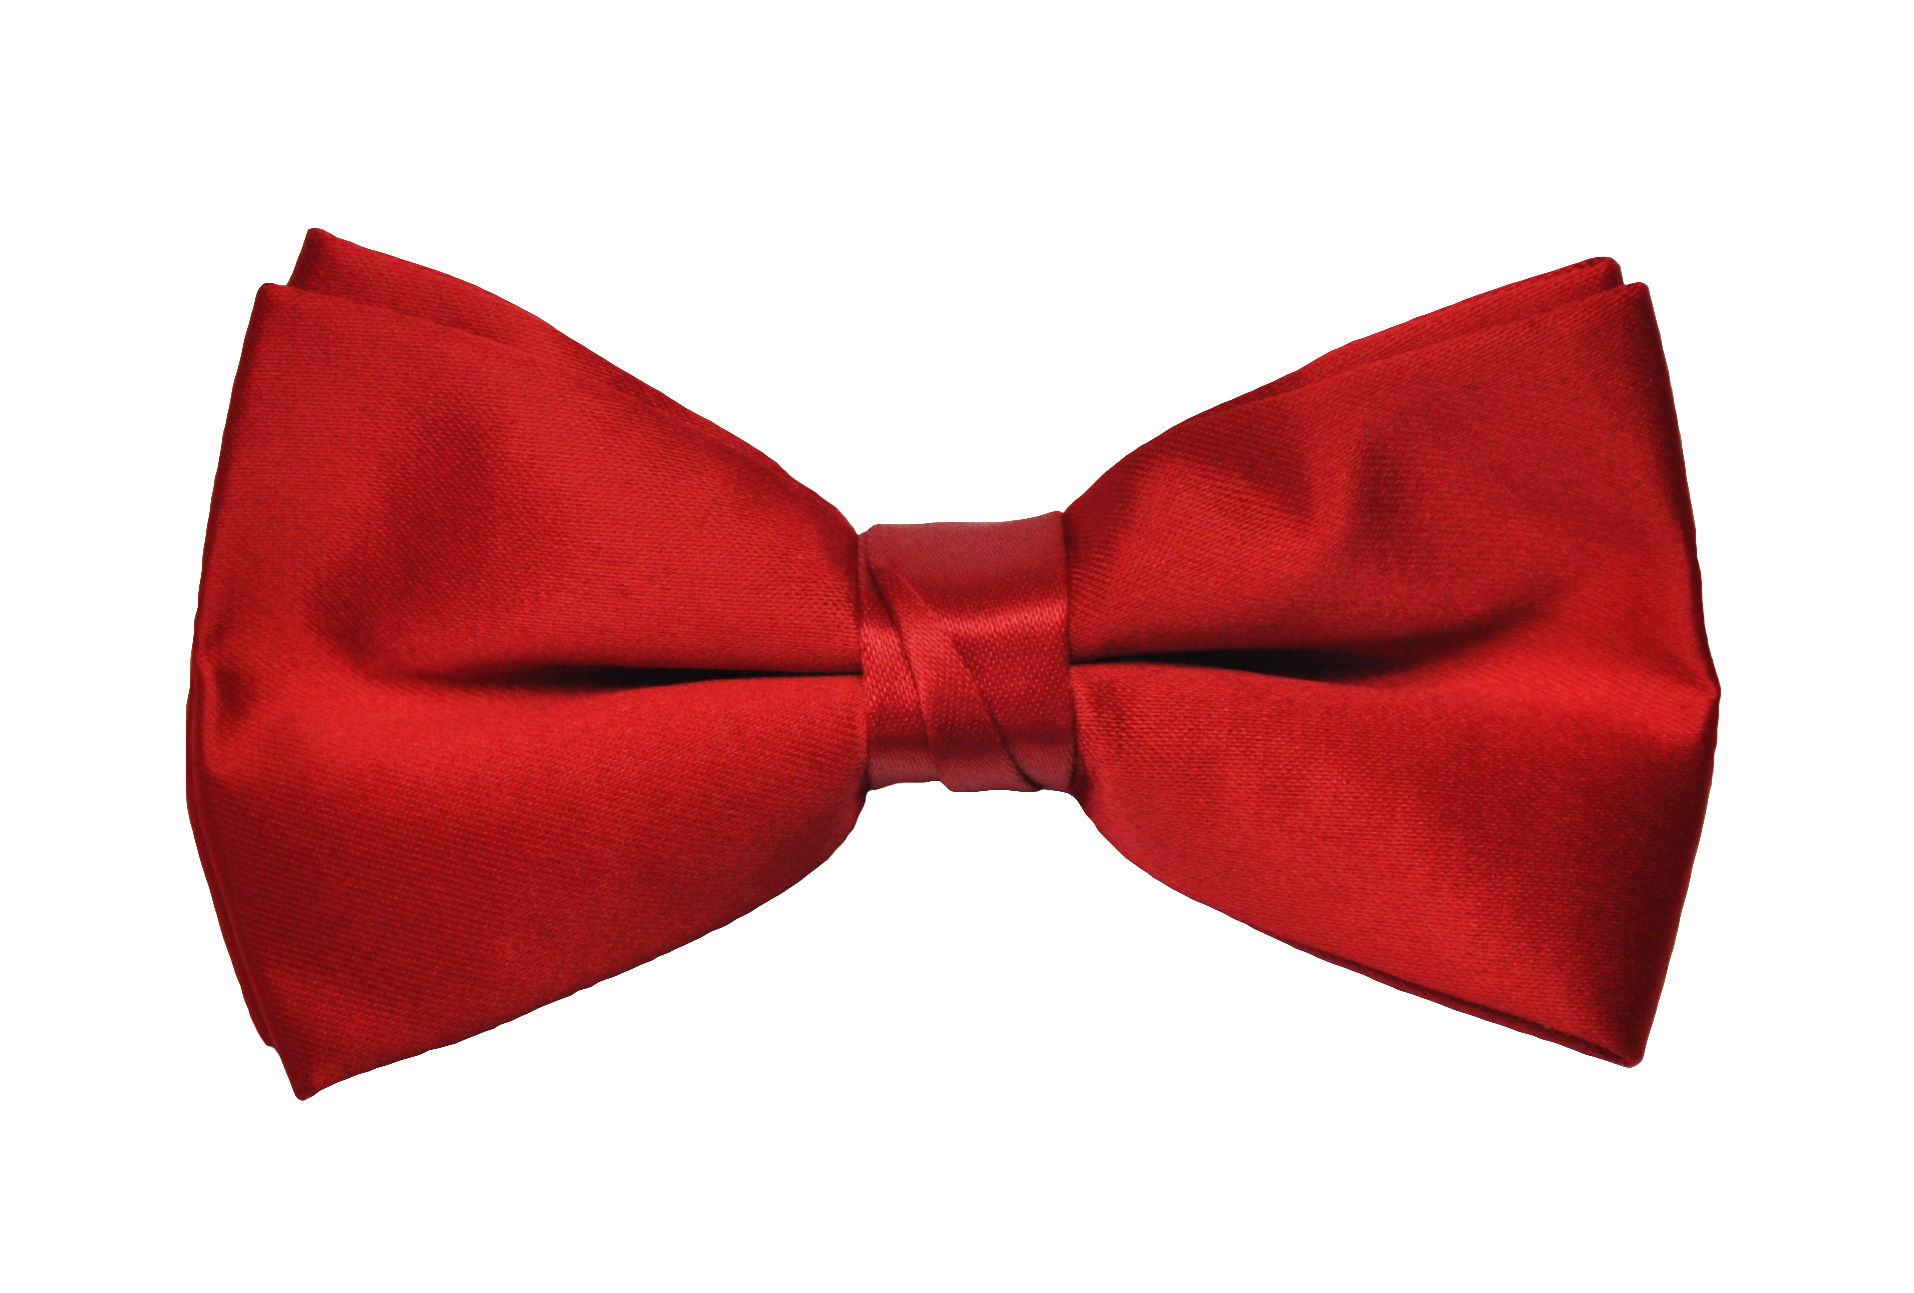 Red Bow Tie Clip Art - Viewing Gallery